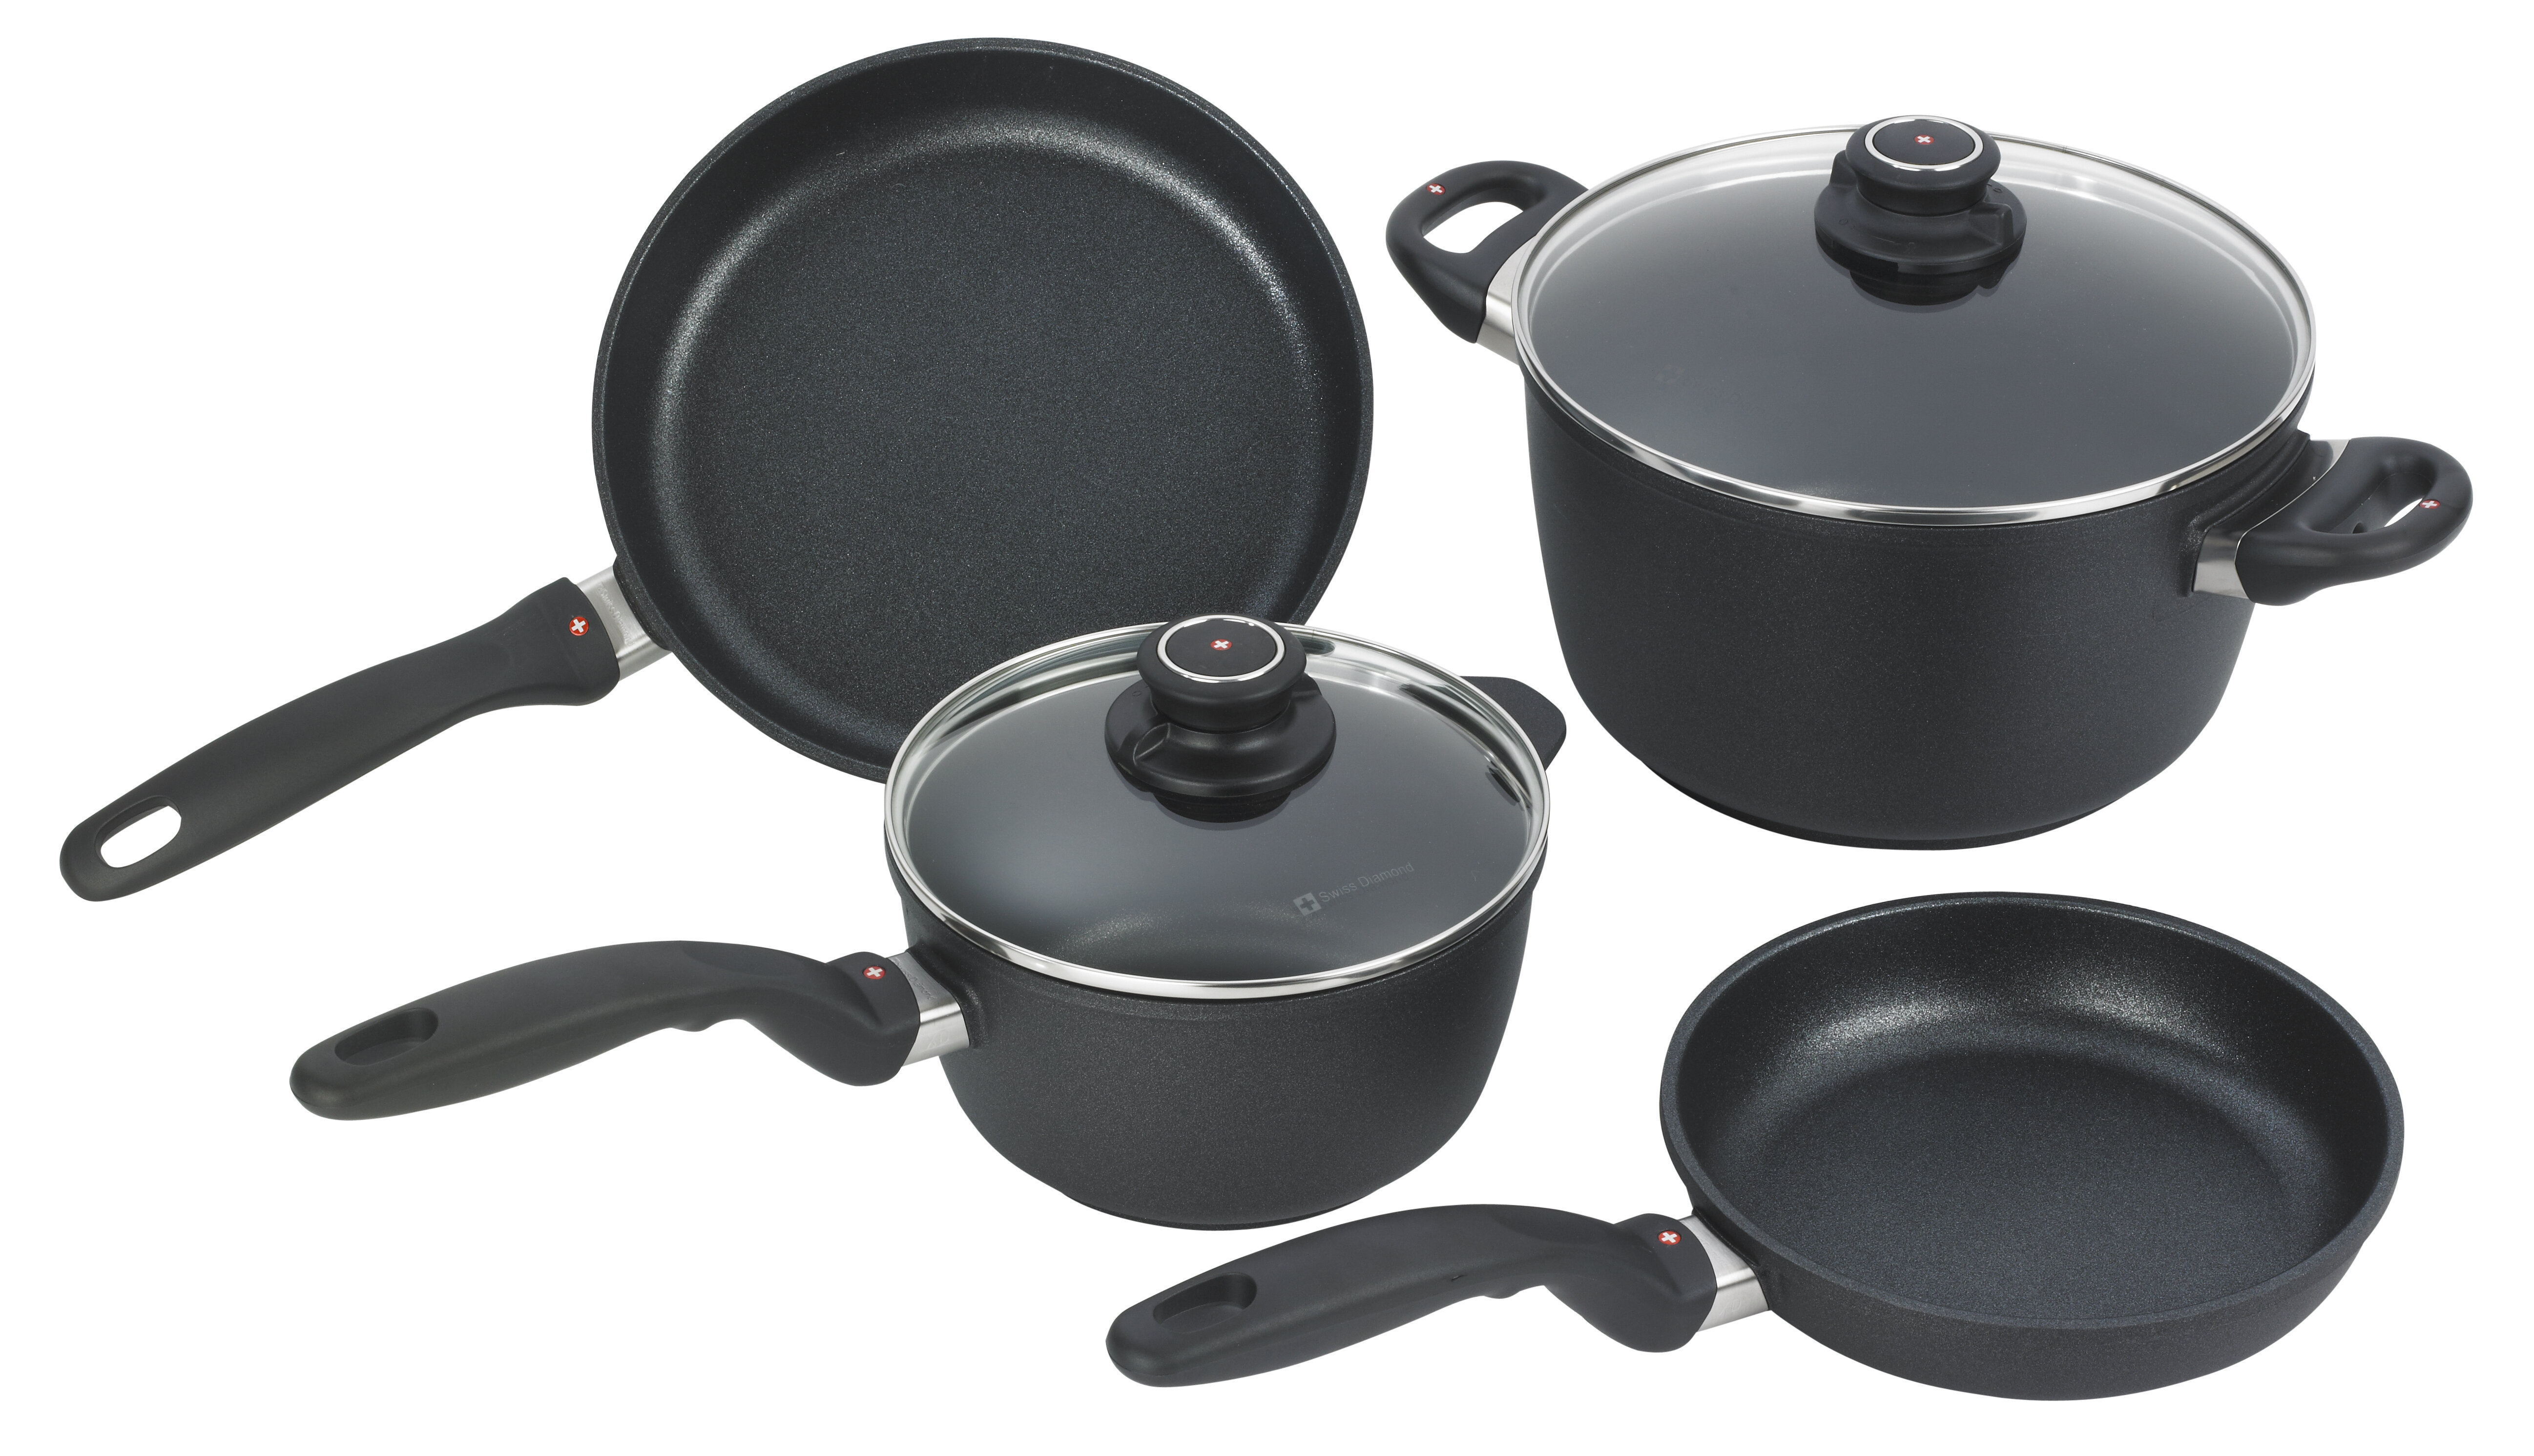 Le Creuset's Steel Stockpot Is on Sale for $92 at